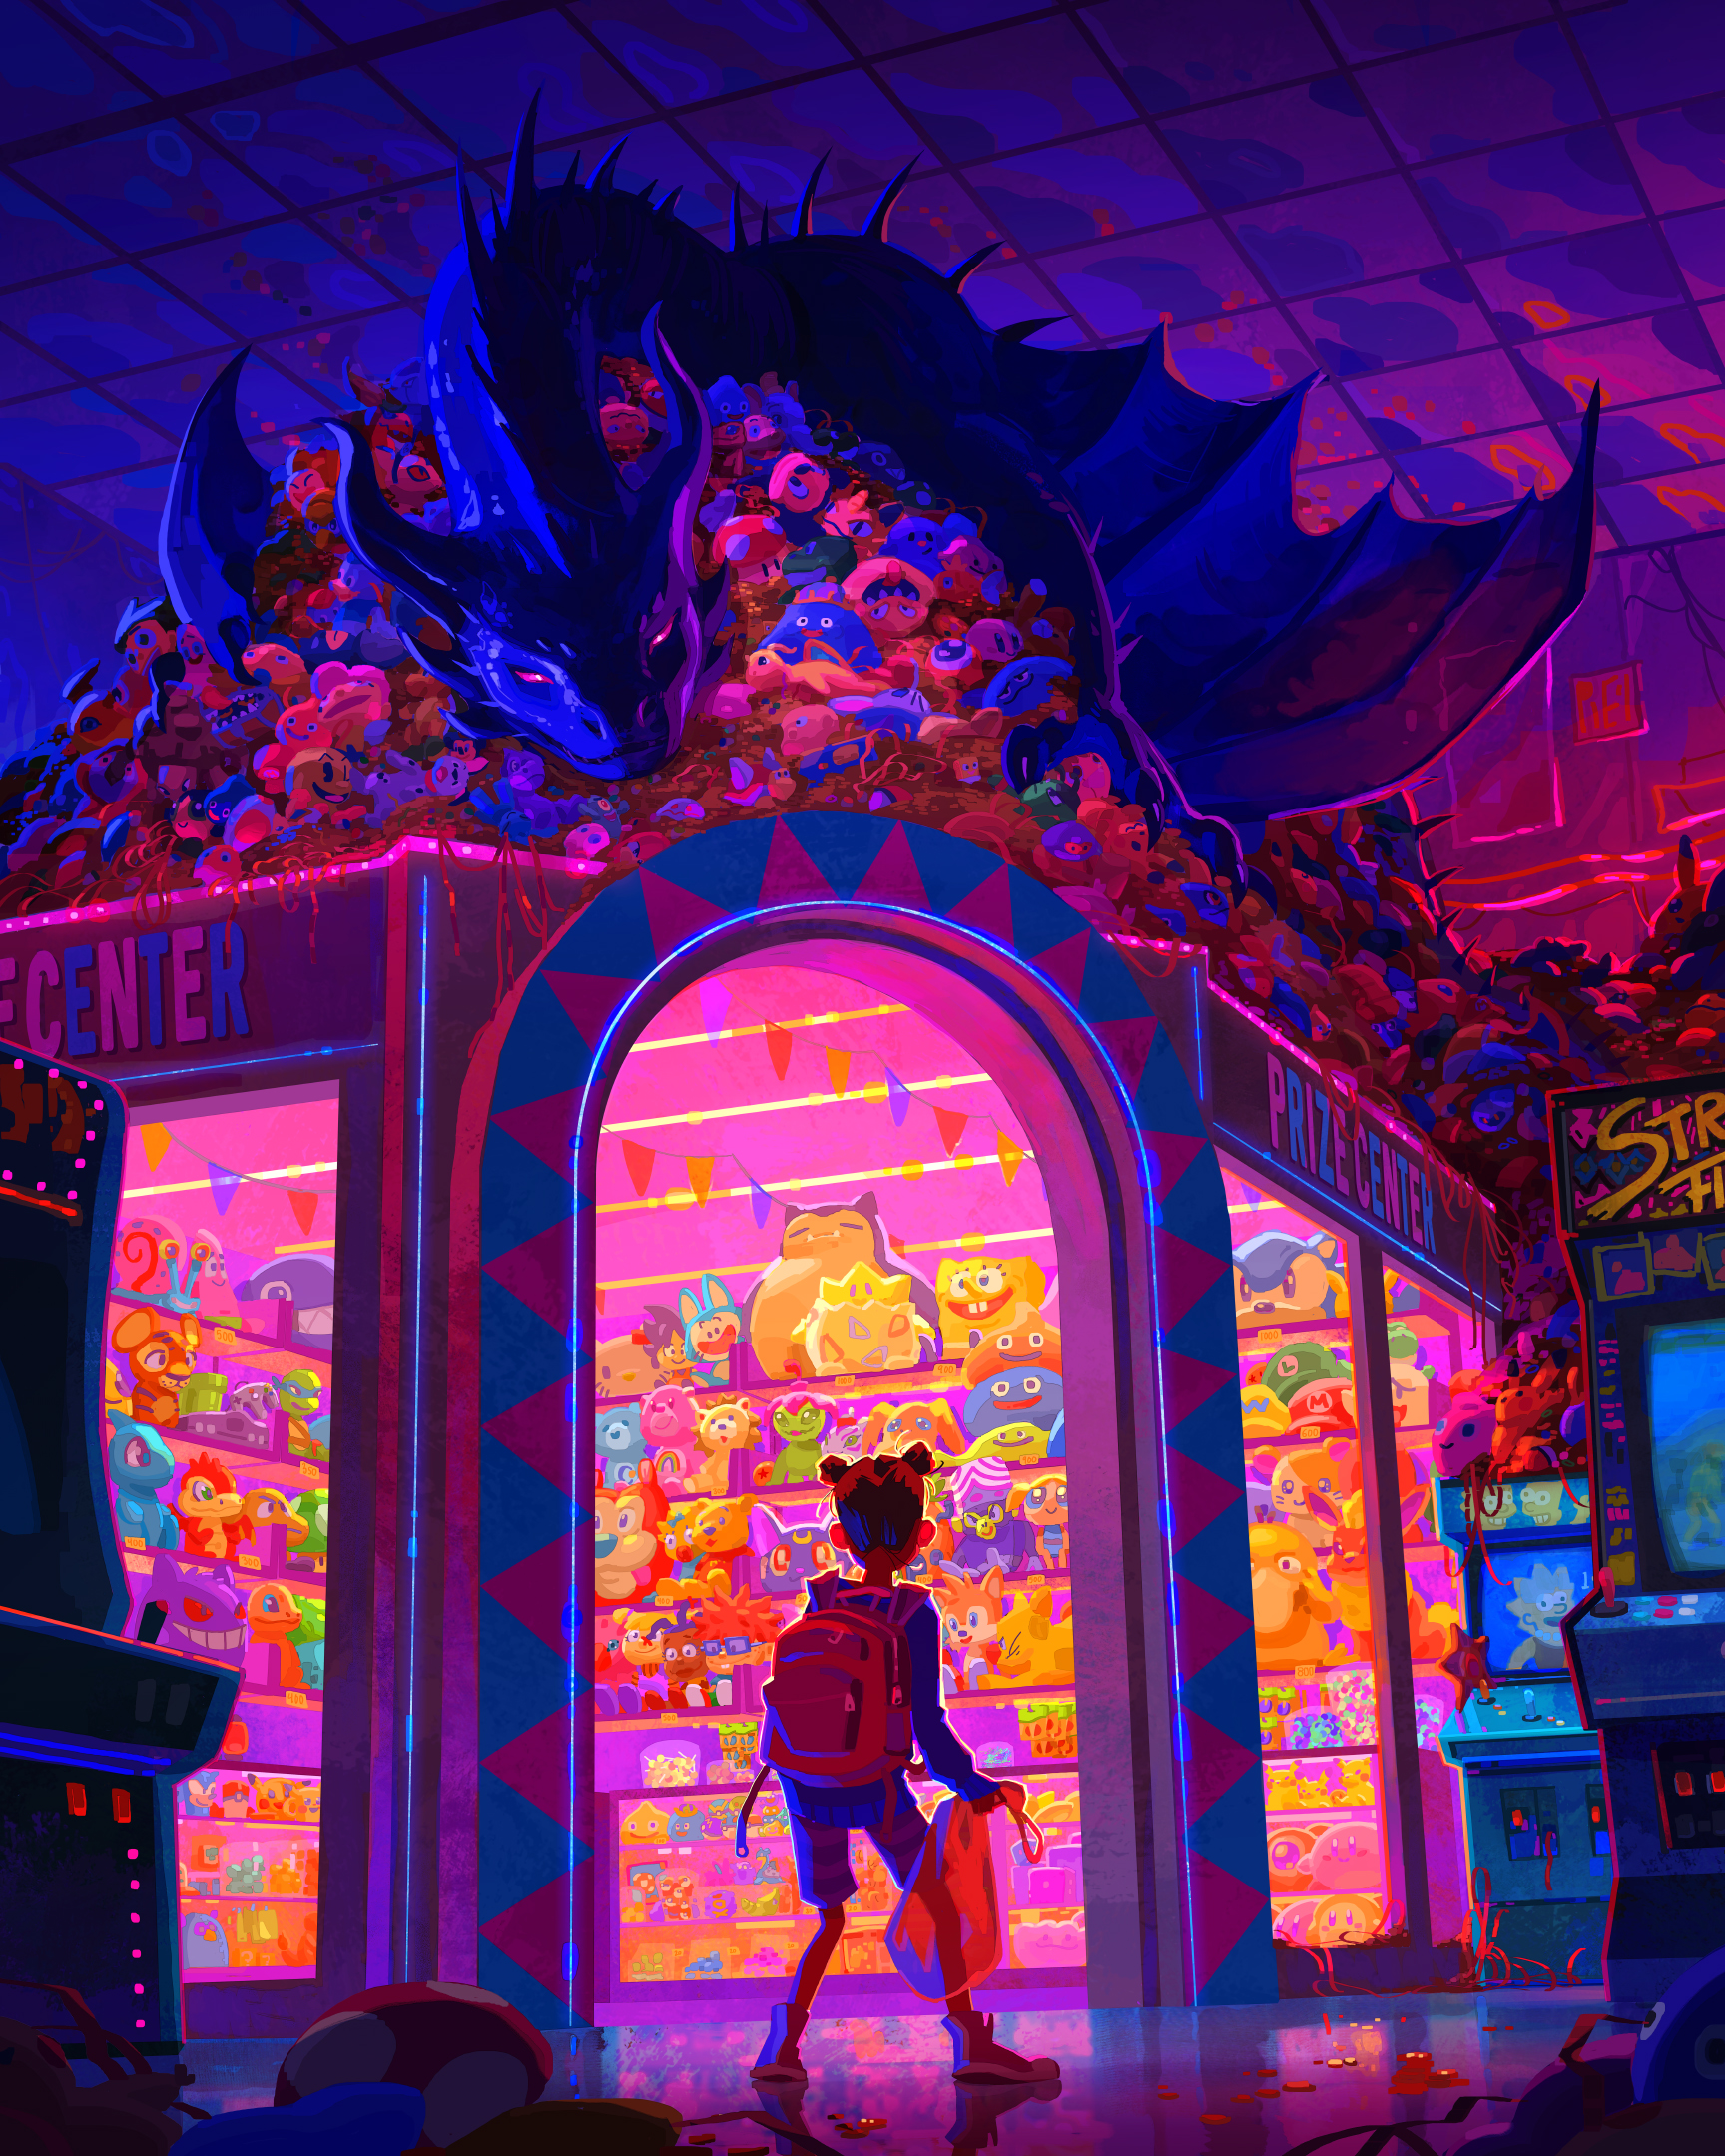 A girl with two buns in her hair stands in front of an arcade prize counter. A black dragon, lit with purple, is curled up on top of the prize counter on top of a massive pile of arcade toys.